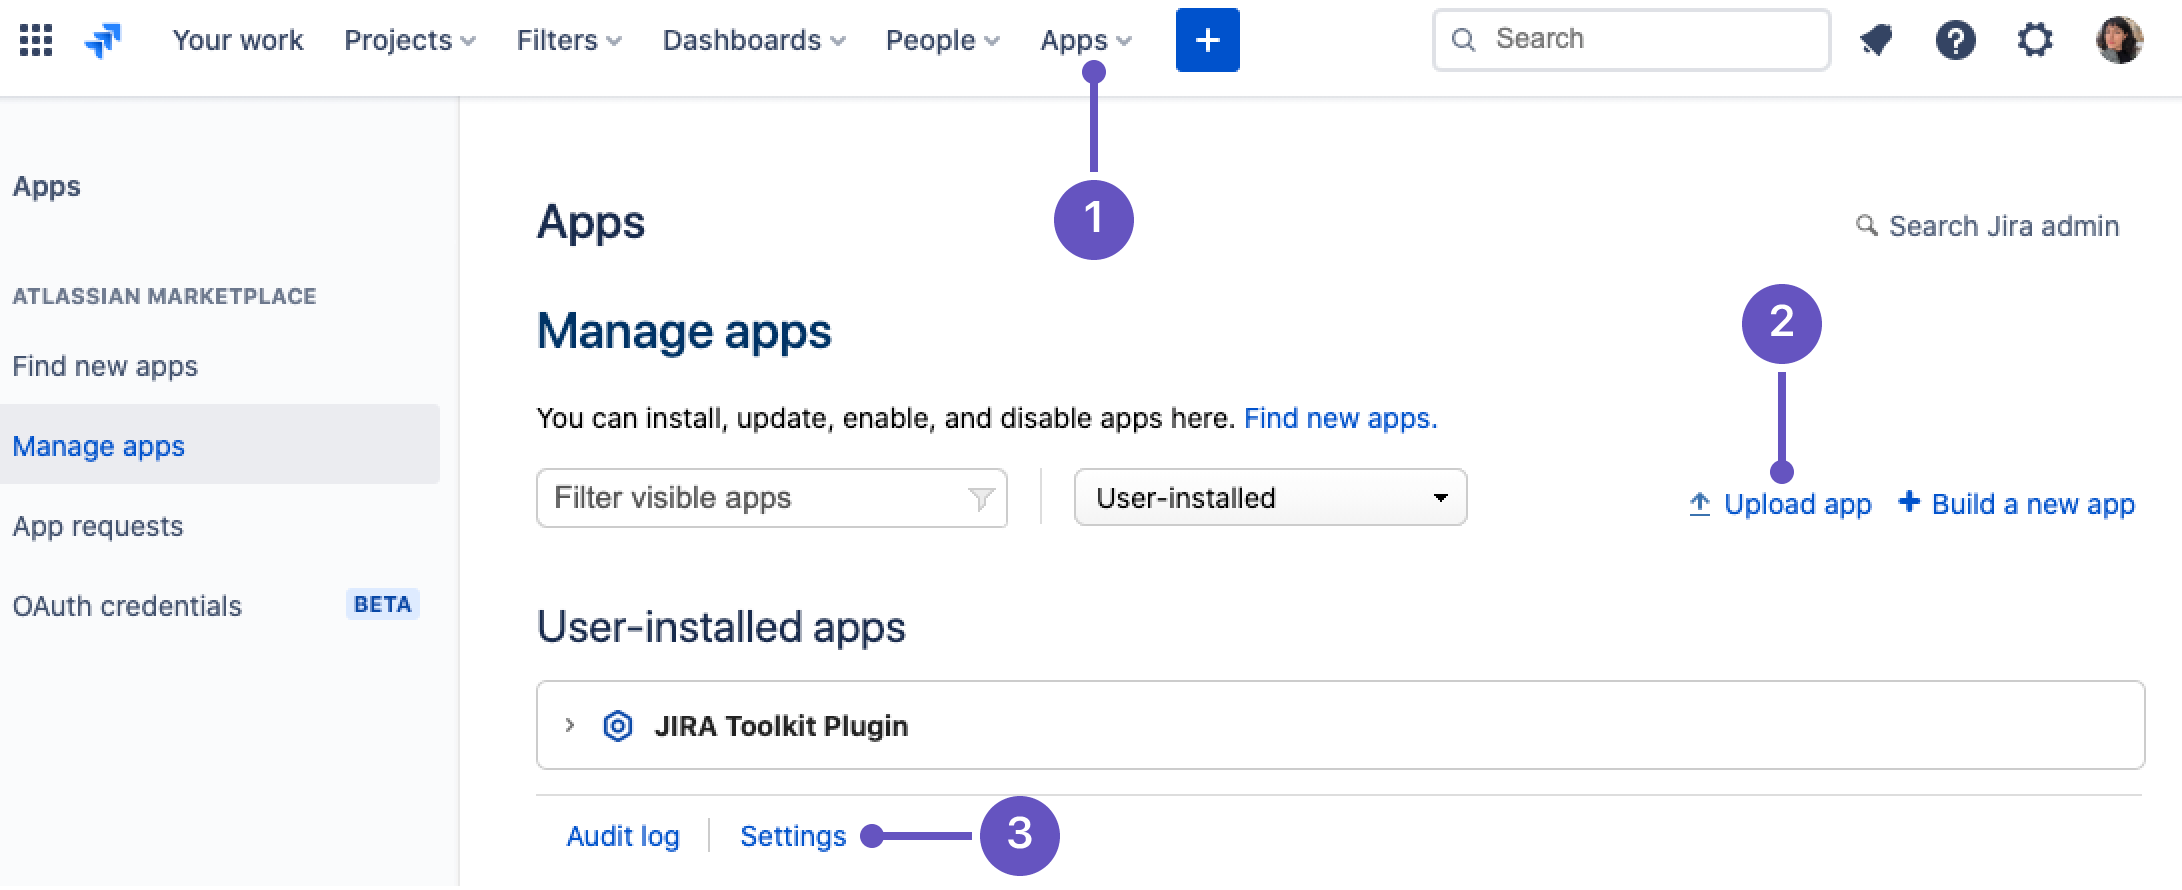 Manage apps in settings to upload a developer app